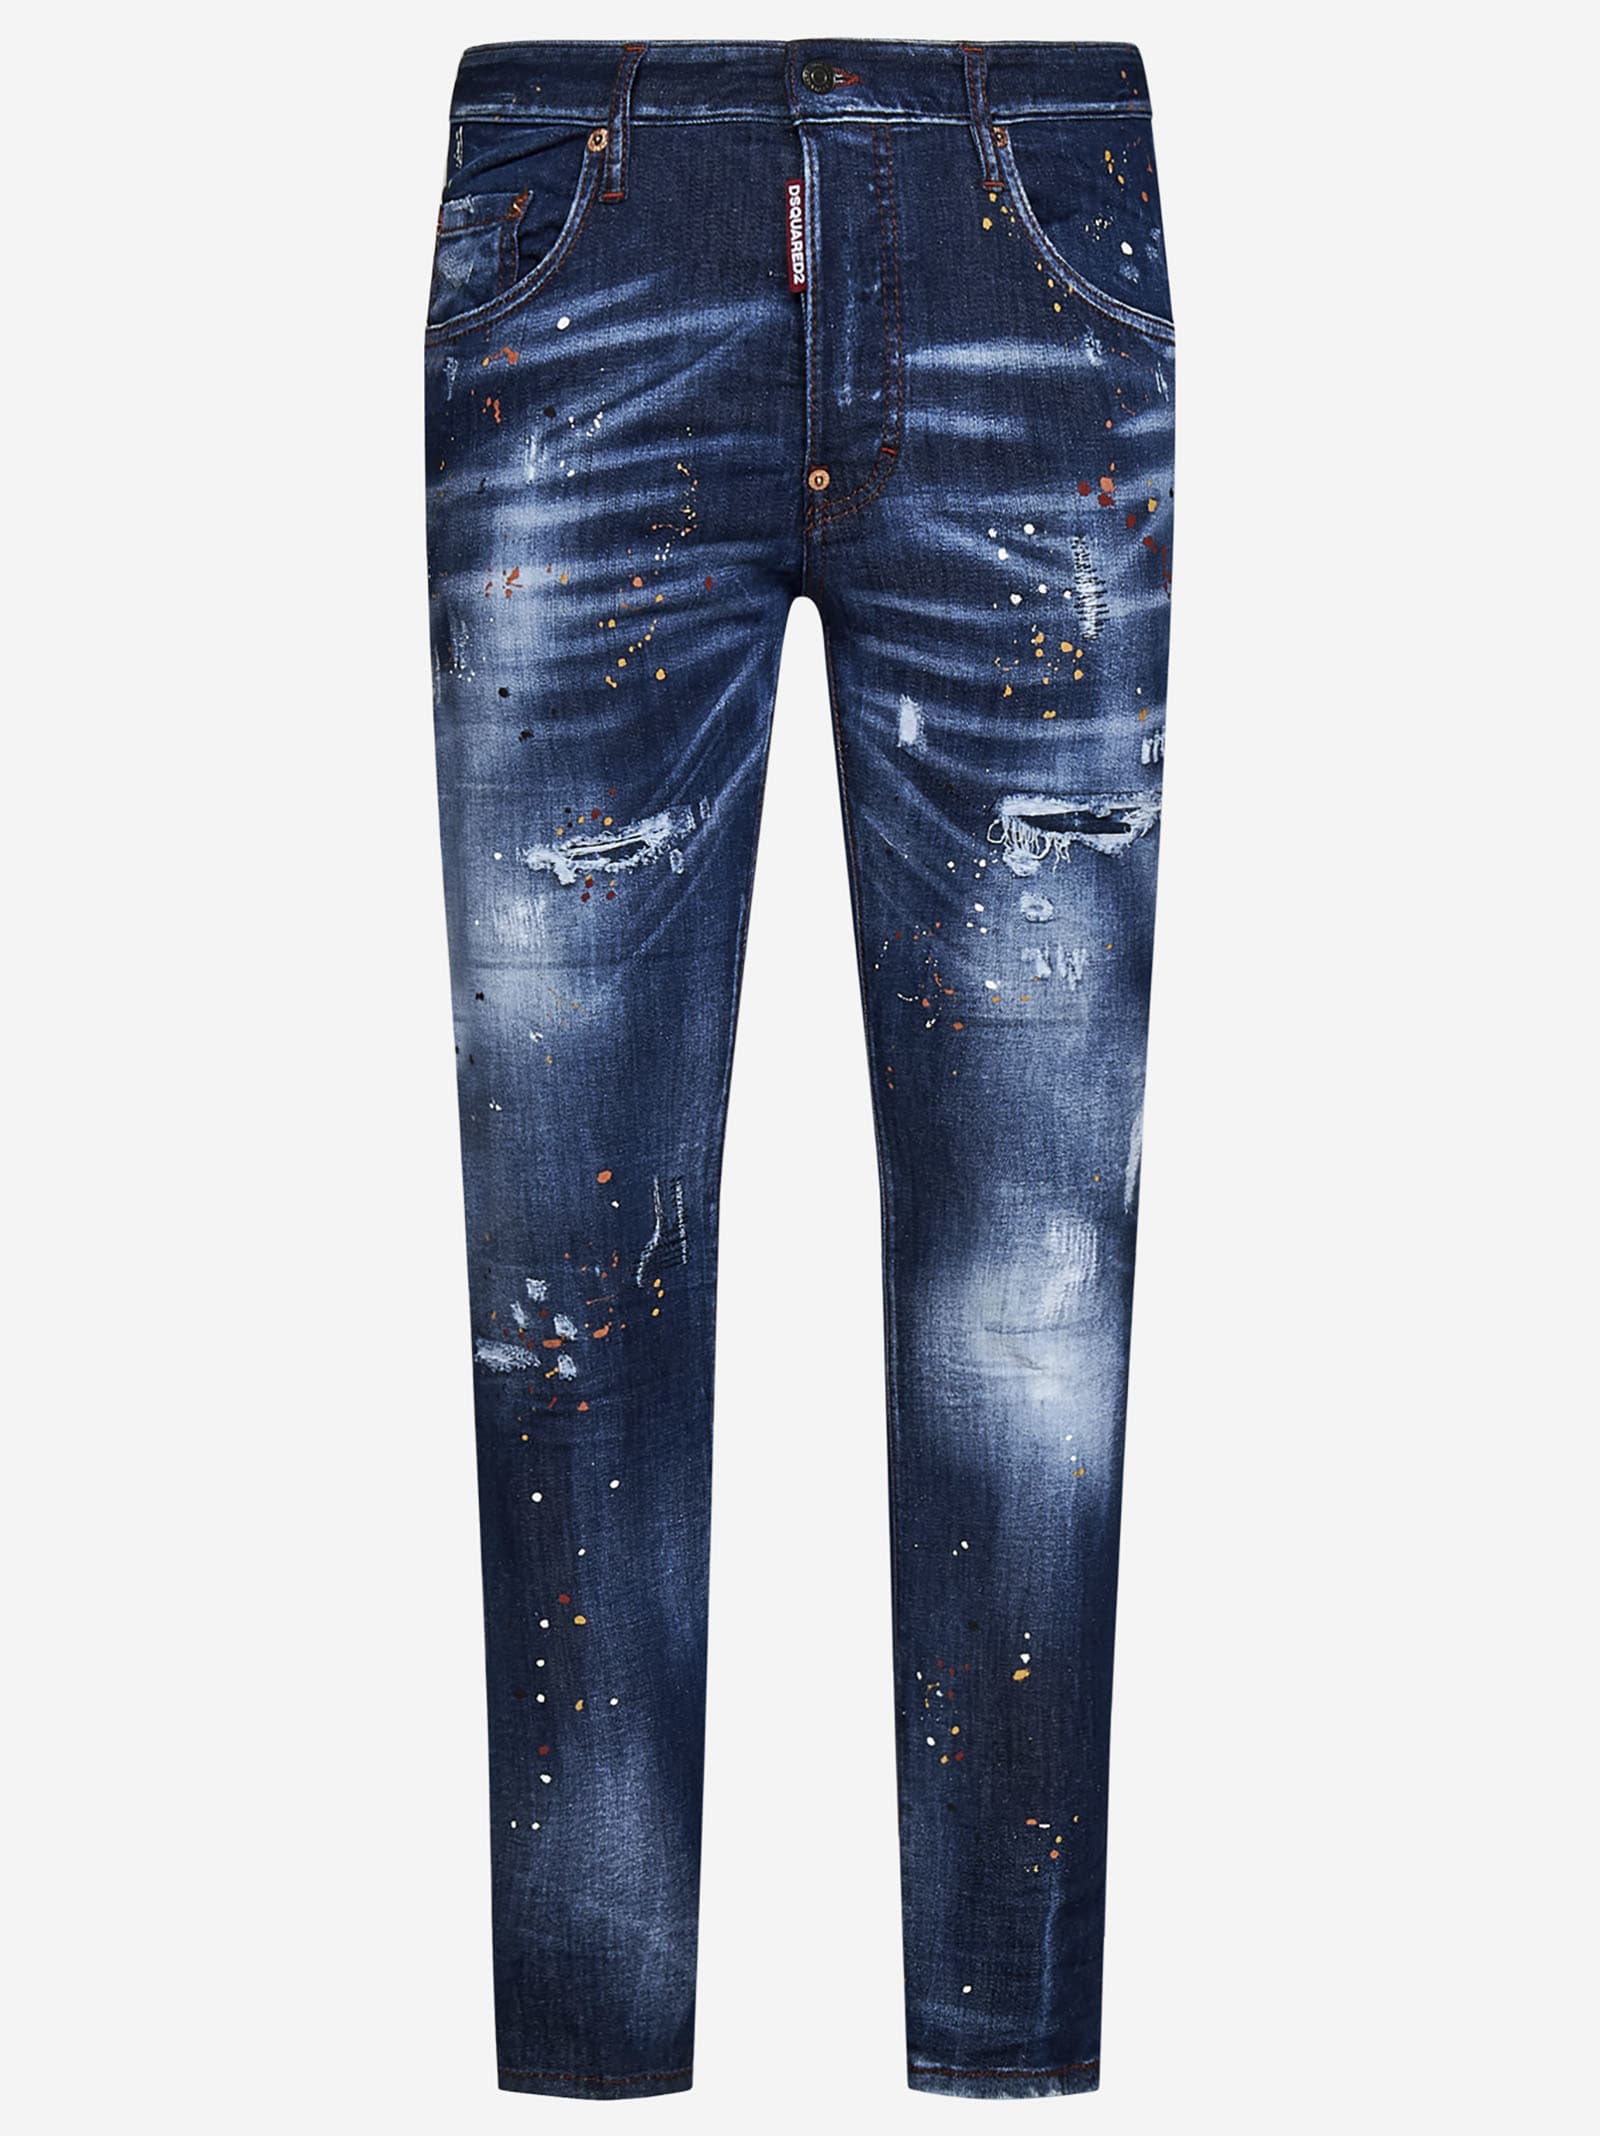 Dsquared2 Medium Autumn Leaves Wash Super Twinky Jeans